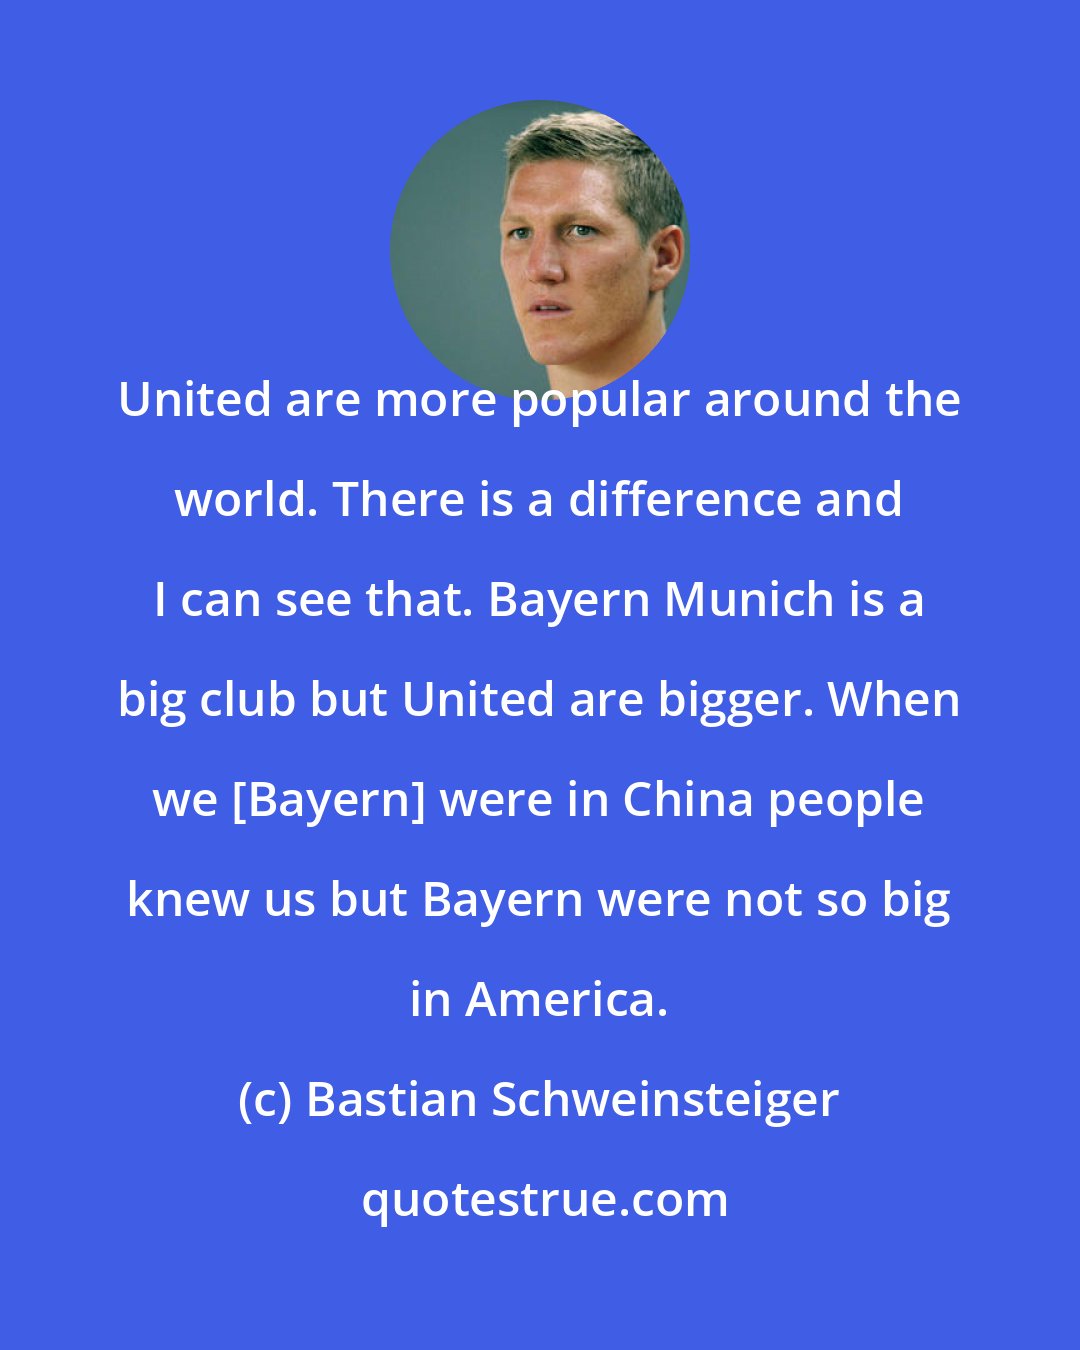 Bastian Schweinsteiger: United are more popular around the world. There is a difference and I can see that. Bayern Munich is a big club but United are bigger. When we [Bayern] were in China people knew us but Bayern were not so big in America.